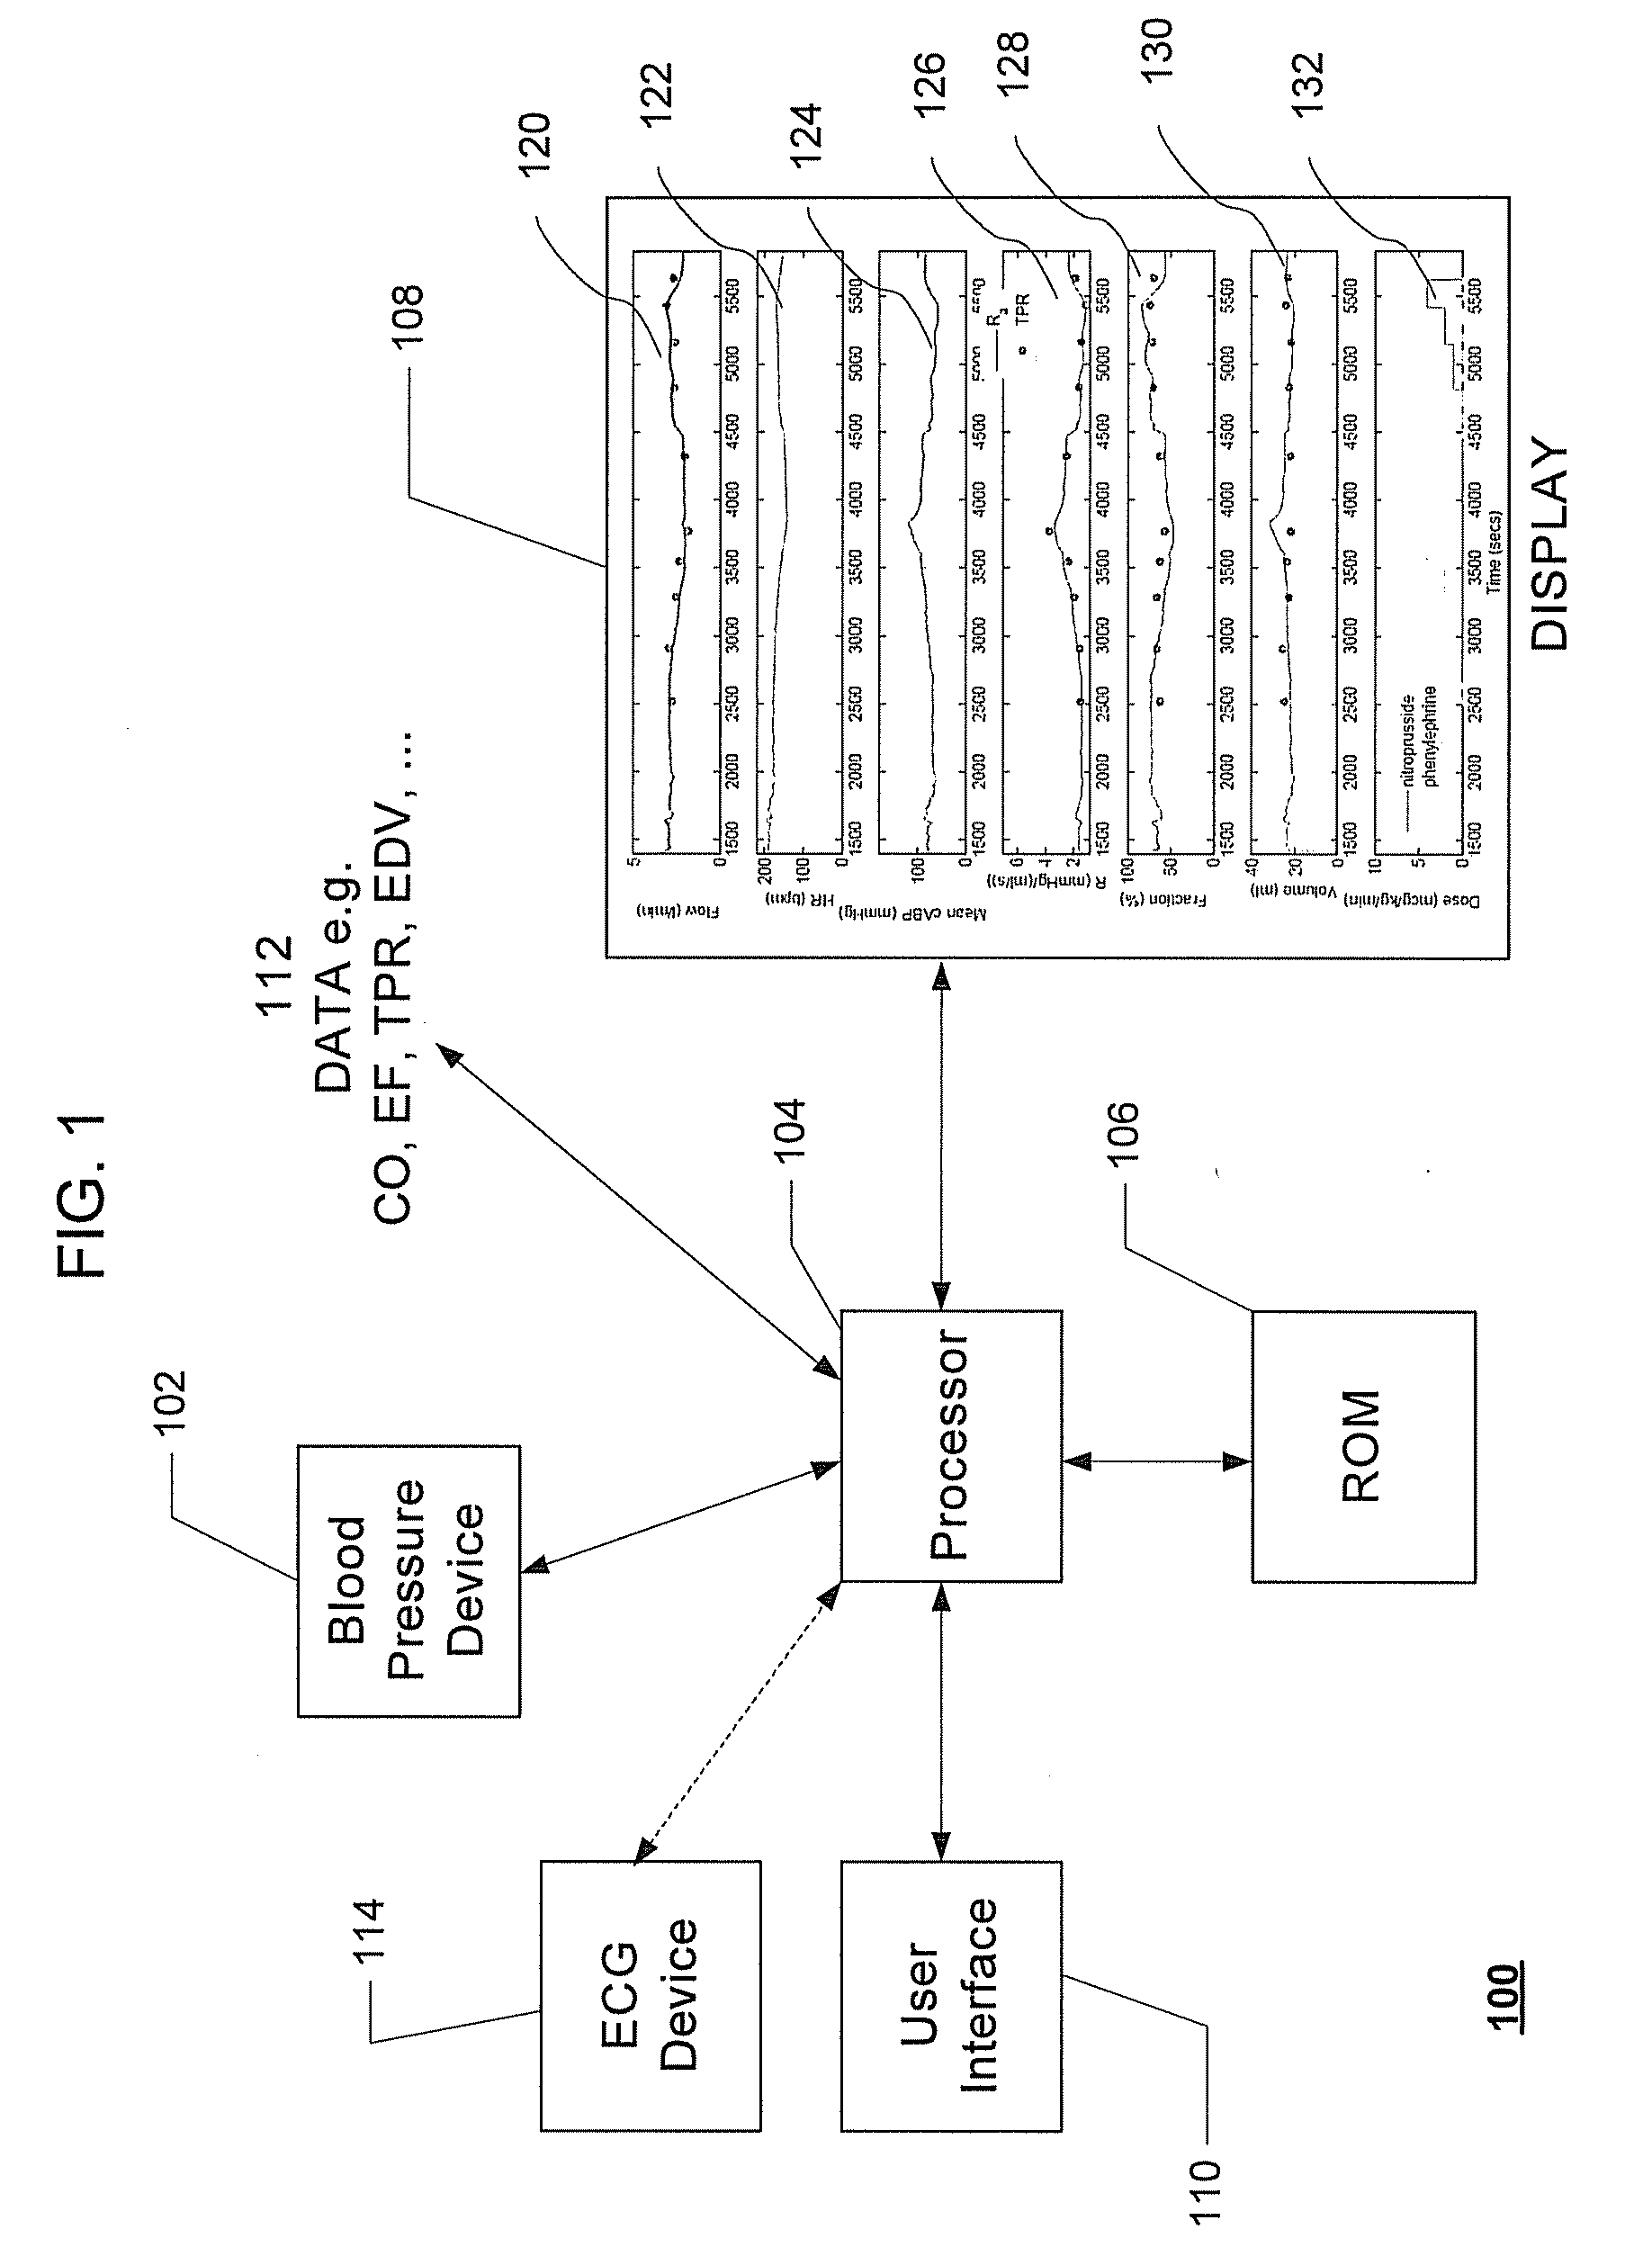 System and method for prediction and detection of circulatory shock